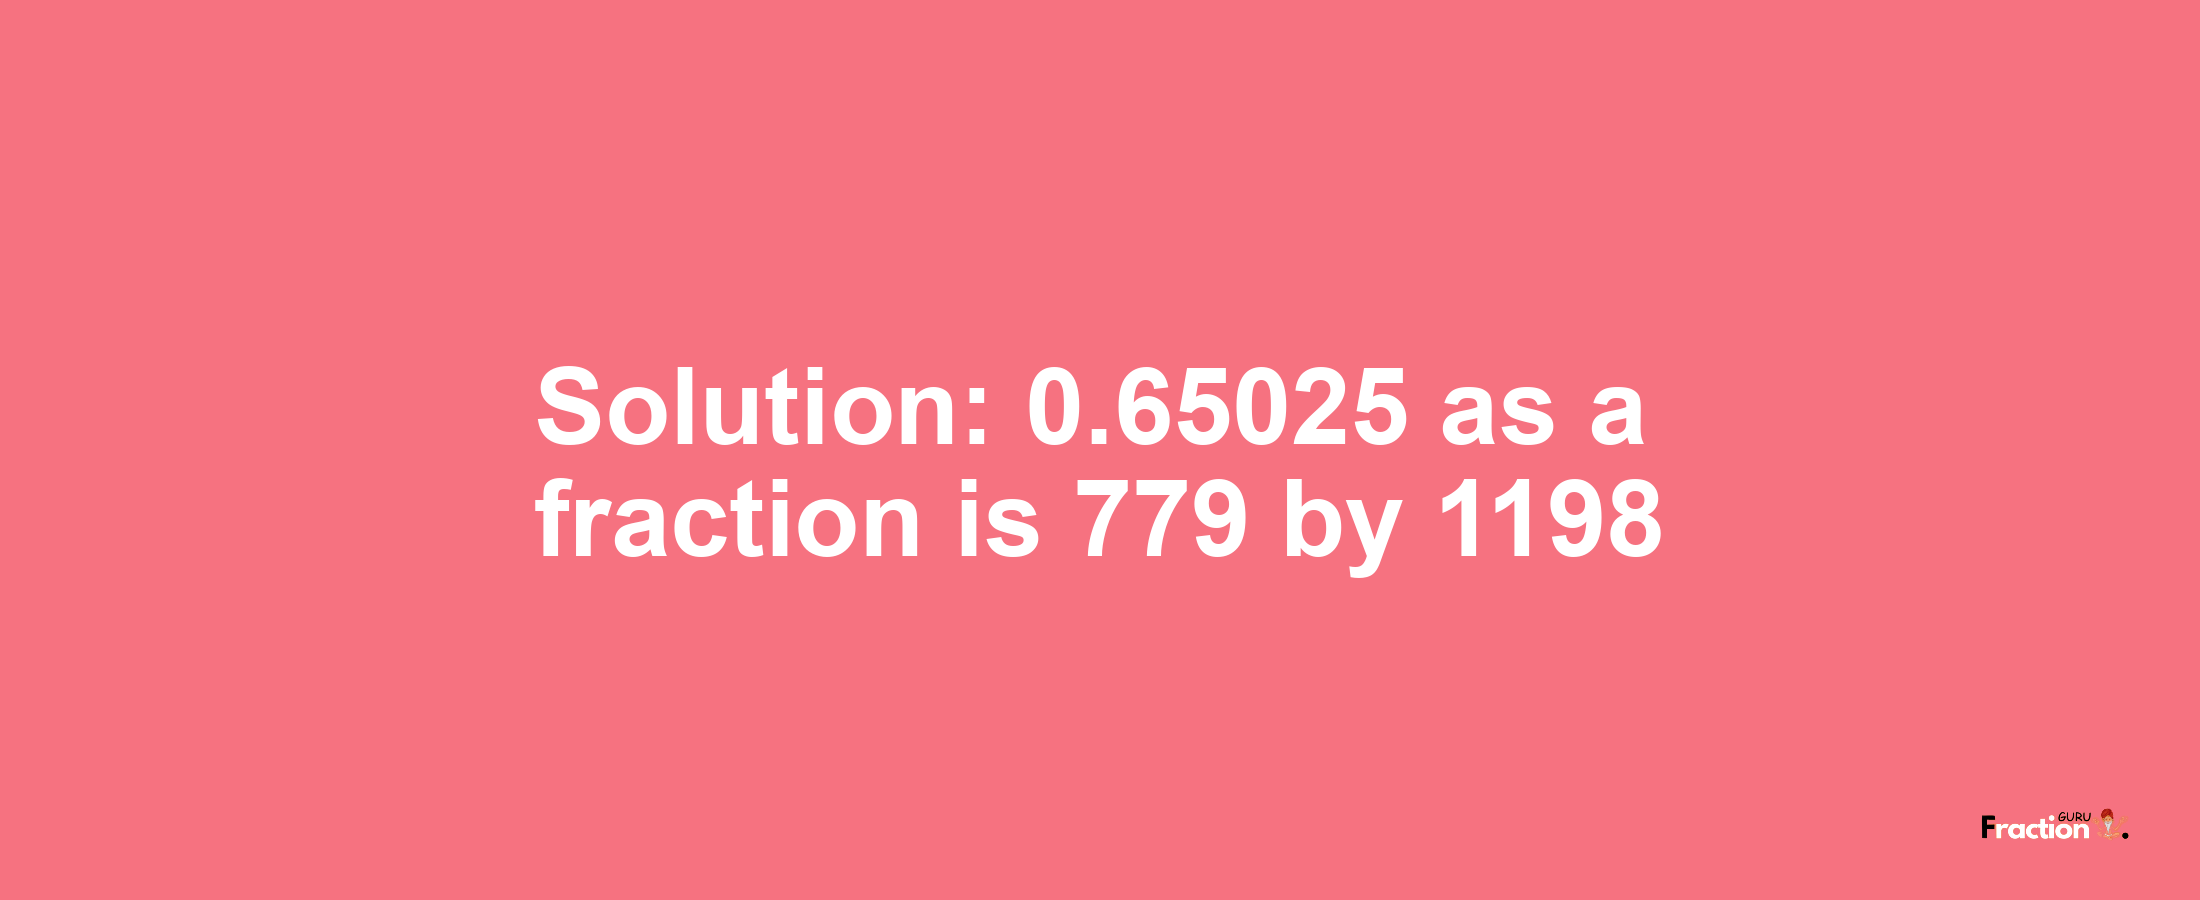 Solution:0.65025 as a fraction is 779/1198